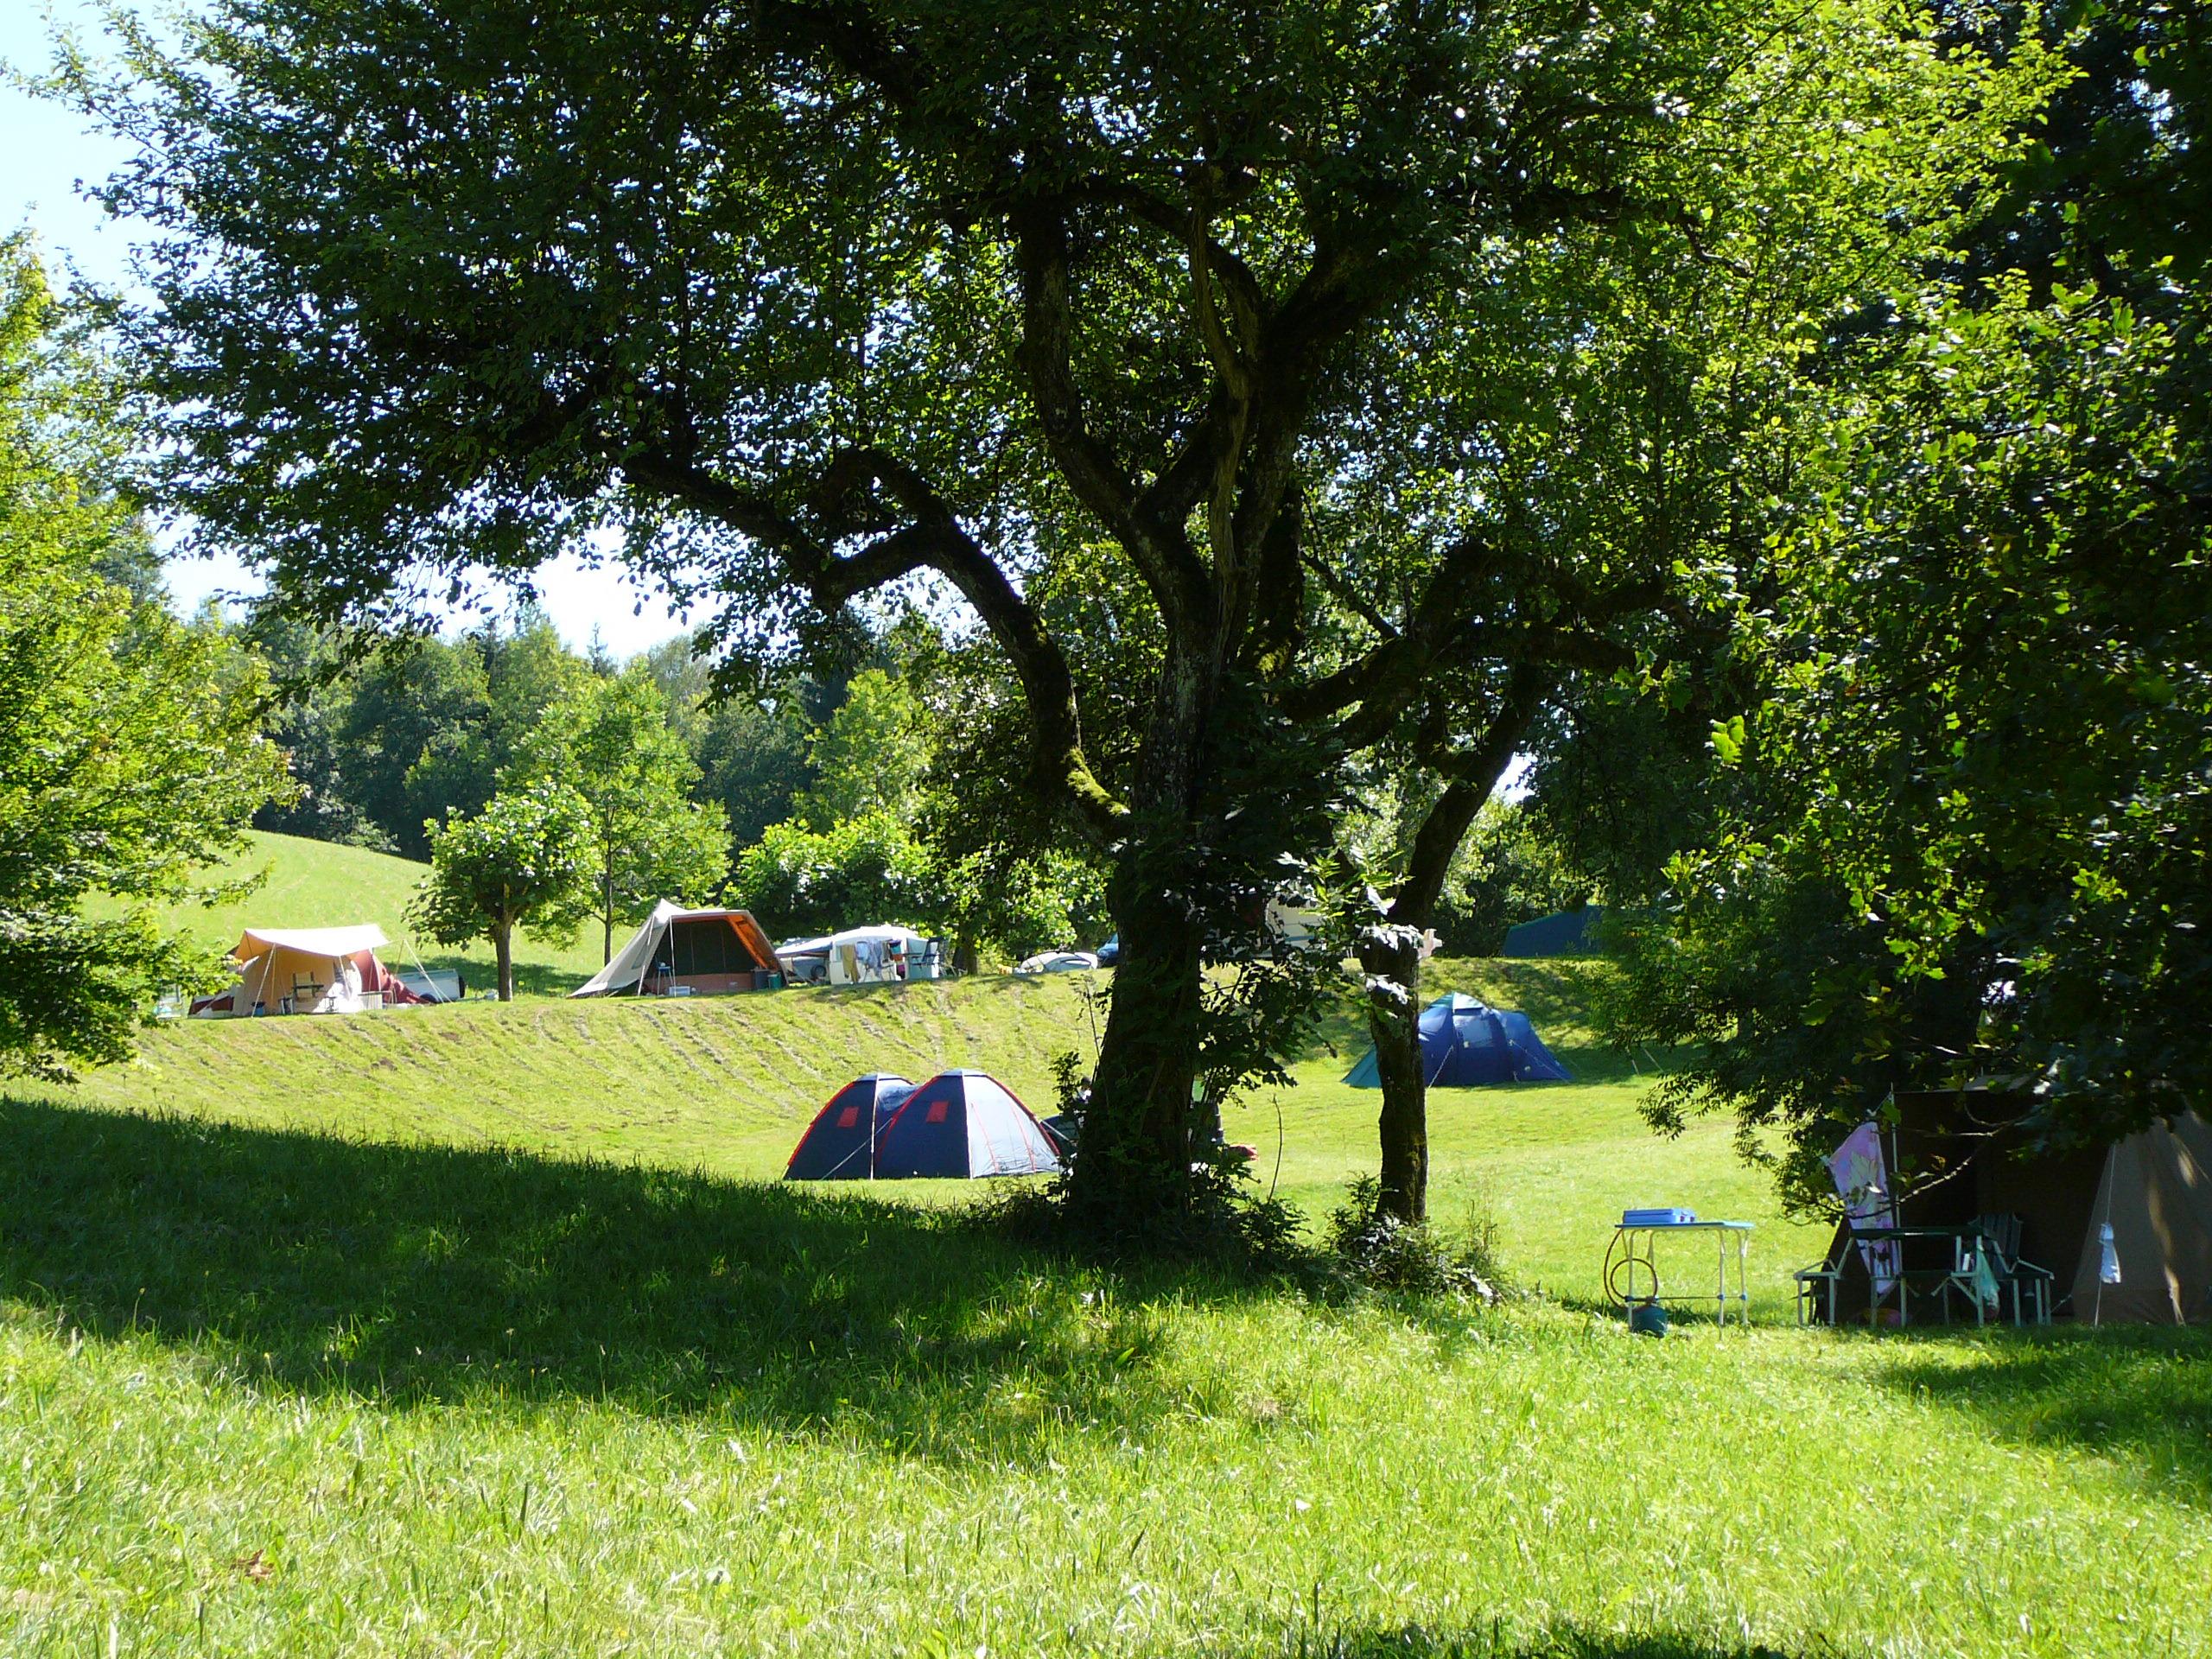 Pitch - Camping Pitch 100M² - Camping Le Crêtoux